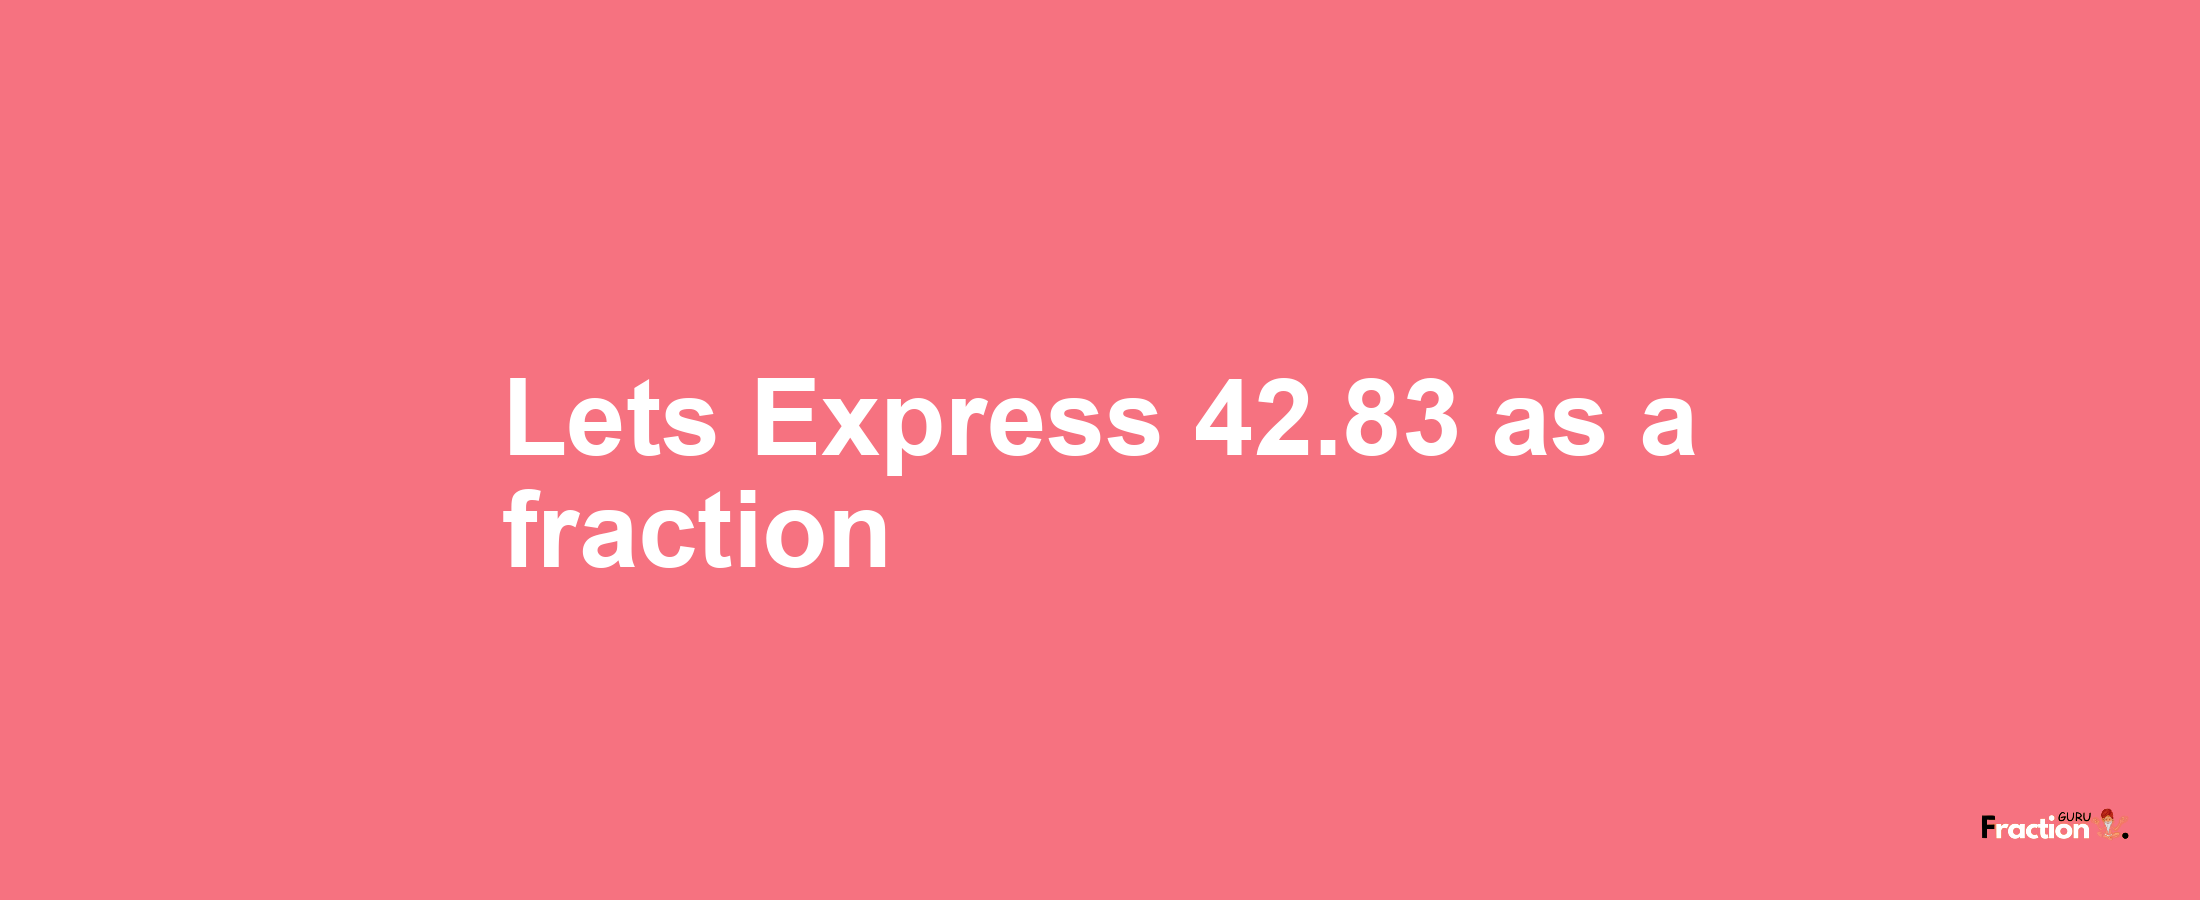 Lets Express 42.83 as afraction